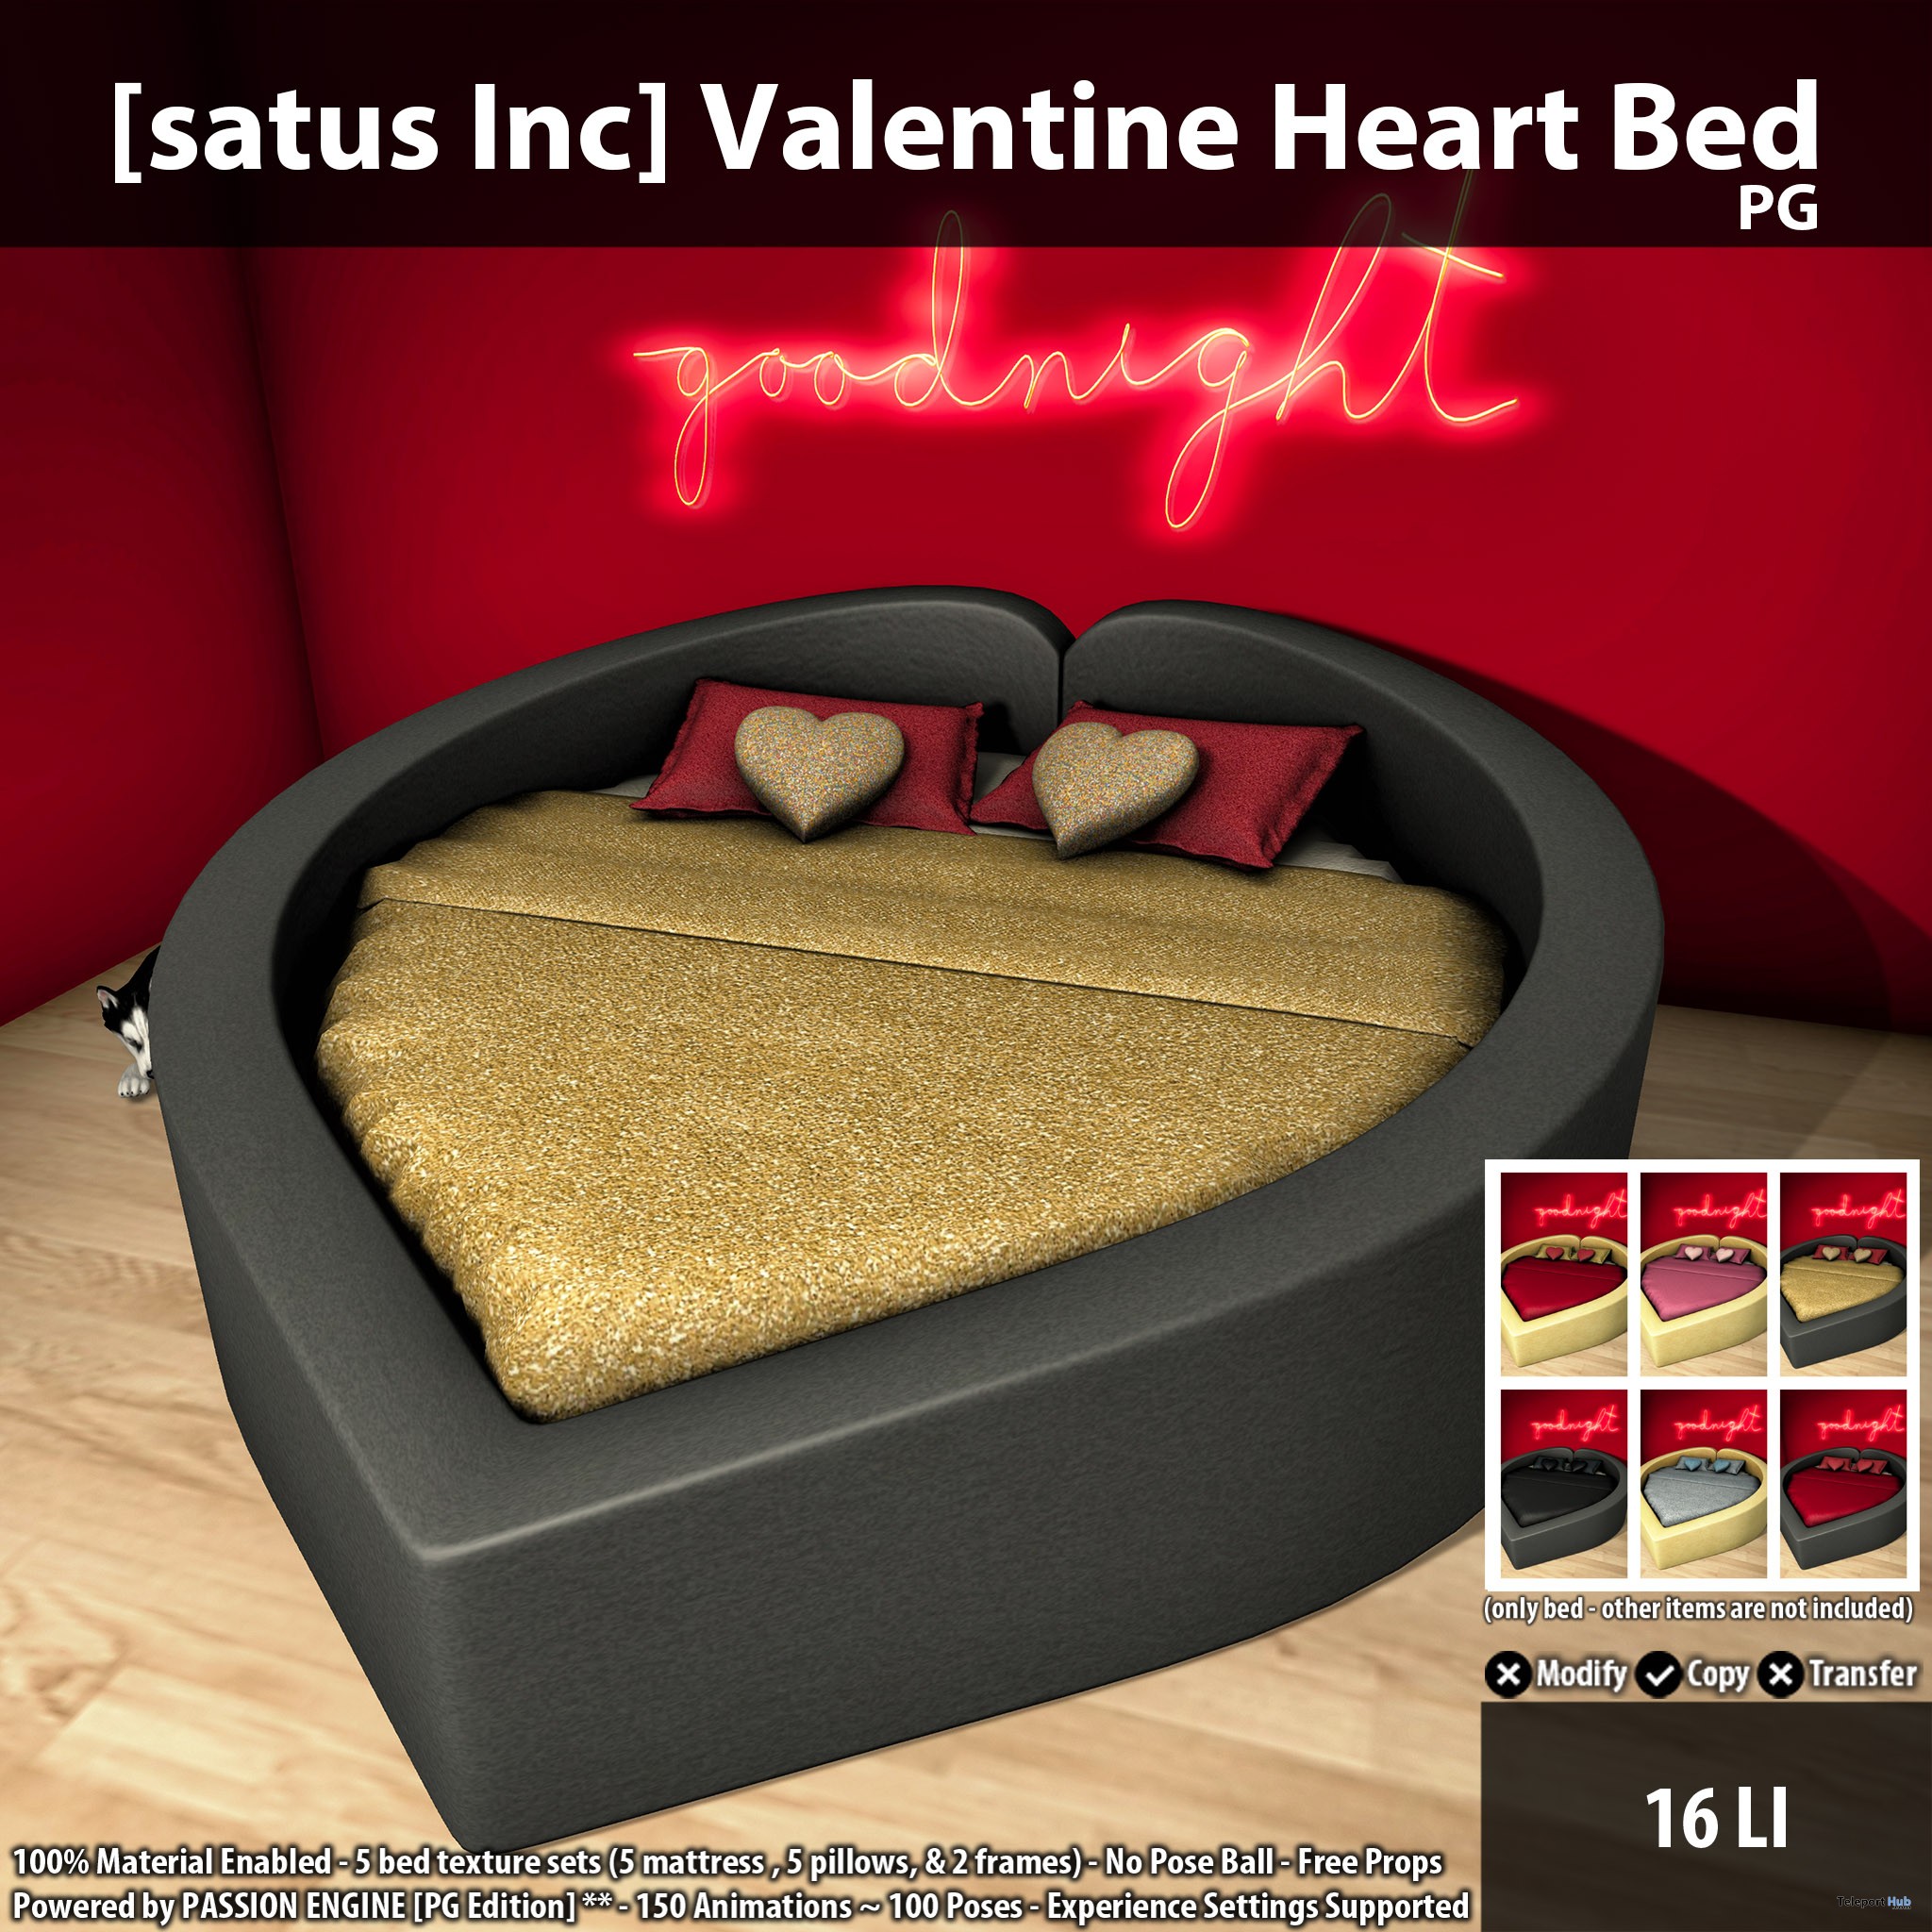 New Release: Valentine Heart Bed by [satus Inc] - Teleport Hub - teleporthub.com